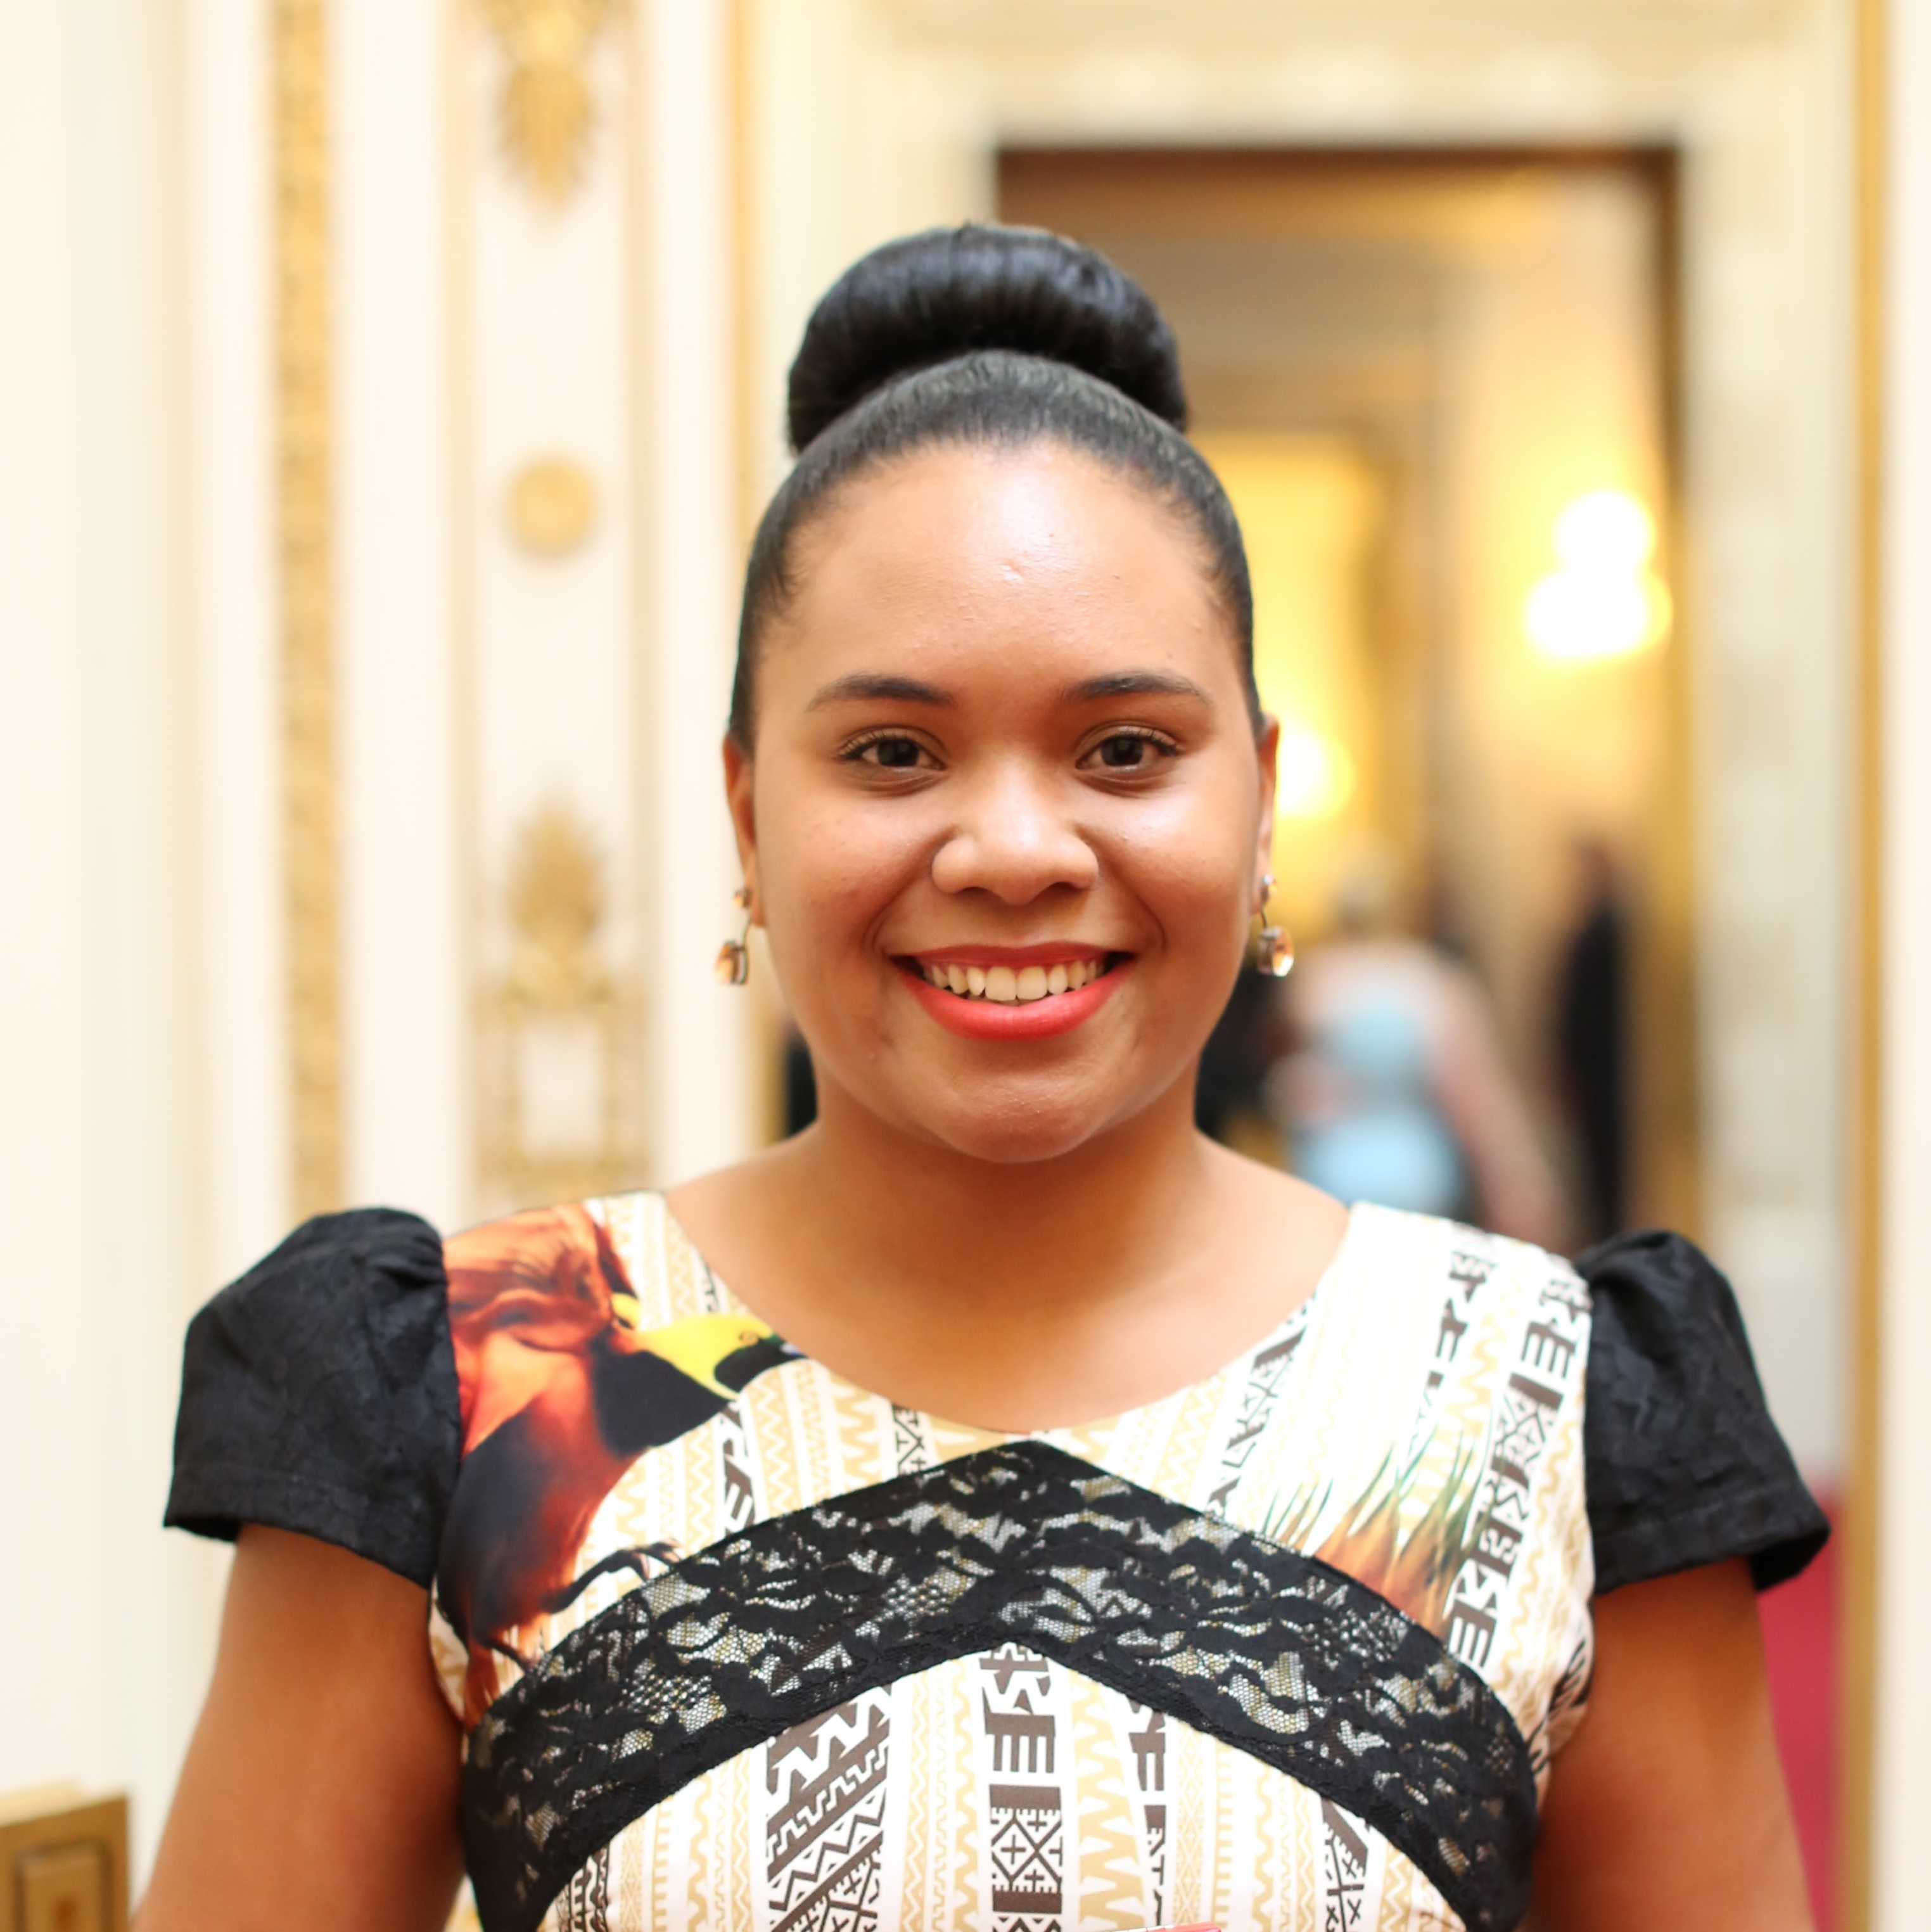 Johnetta Lili 2017 Queen's Young Leader from Papua New Guinea